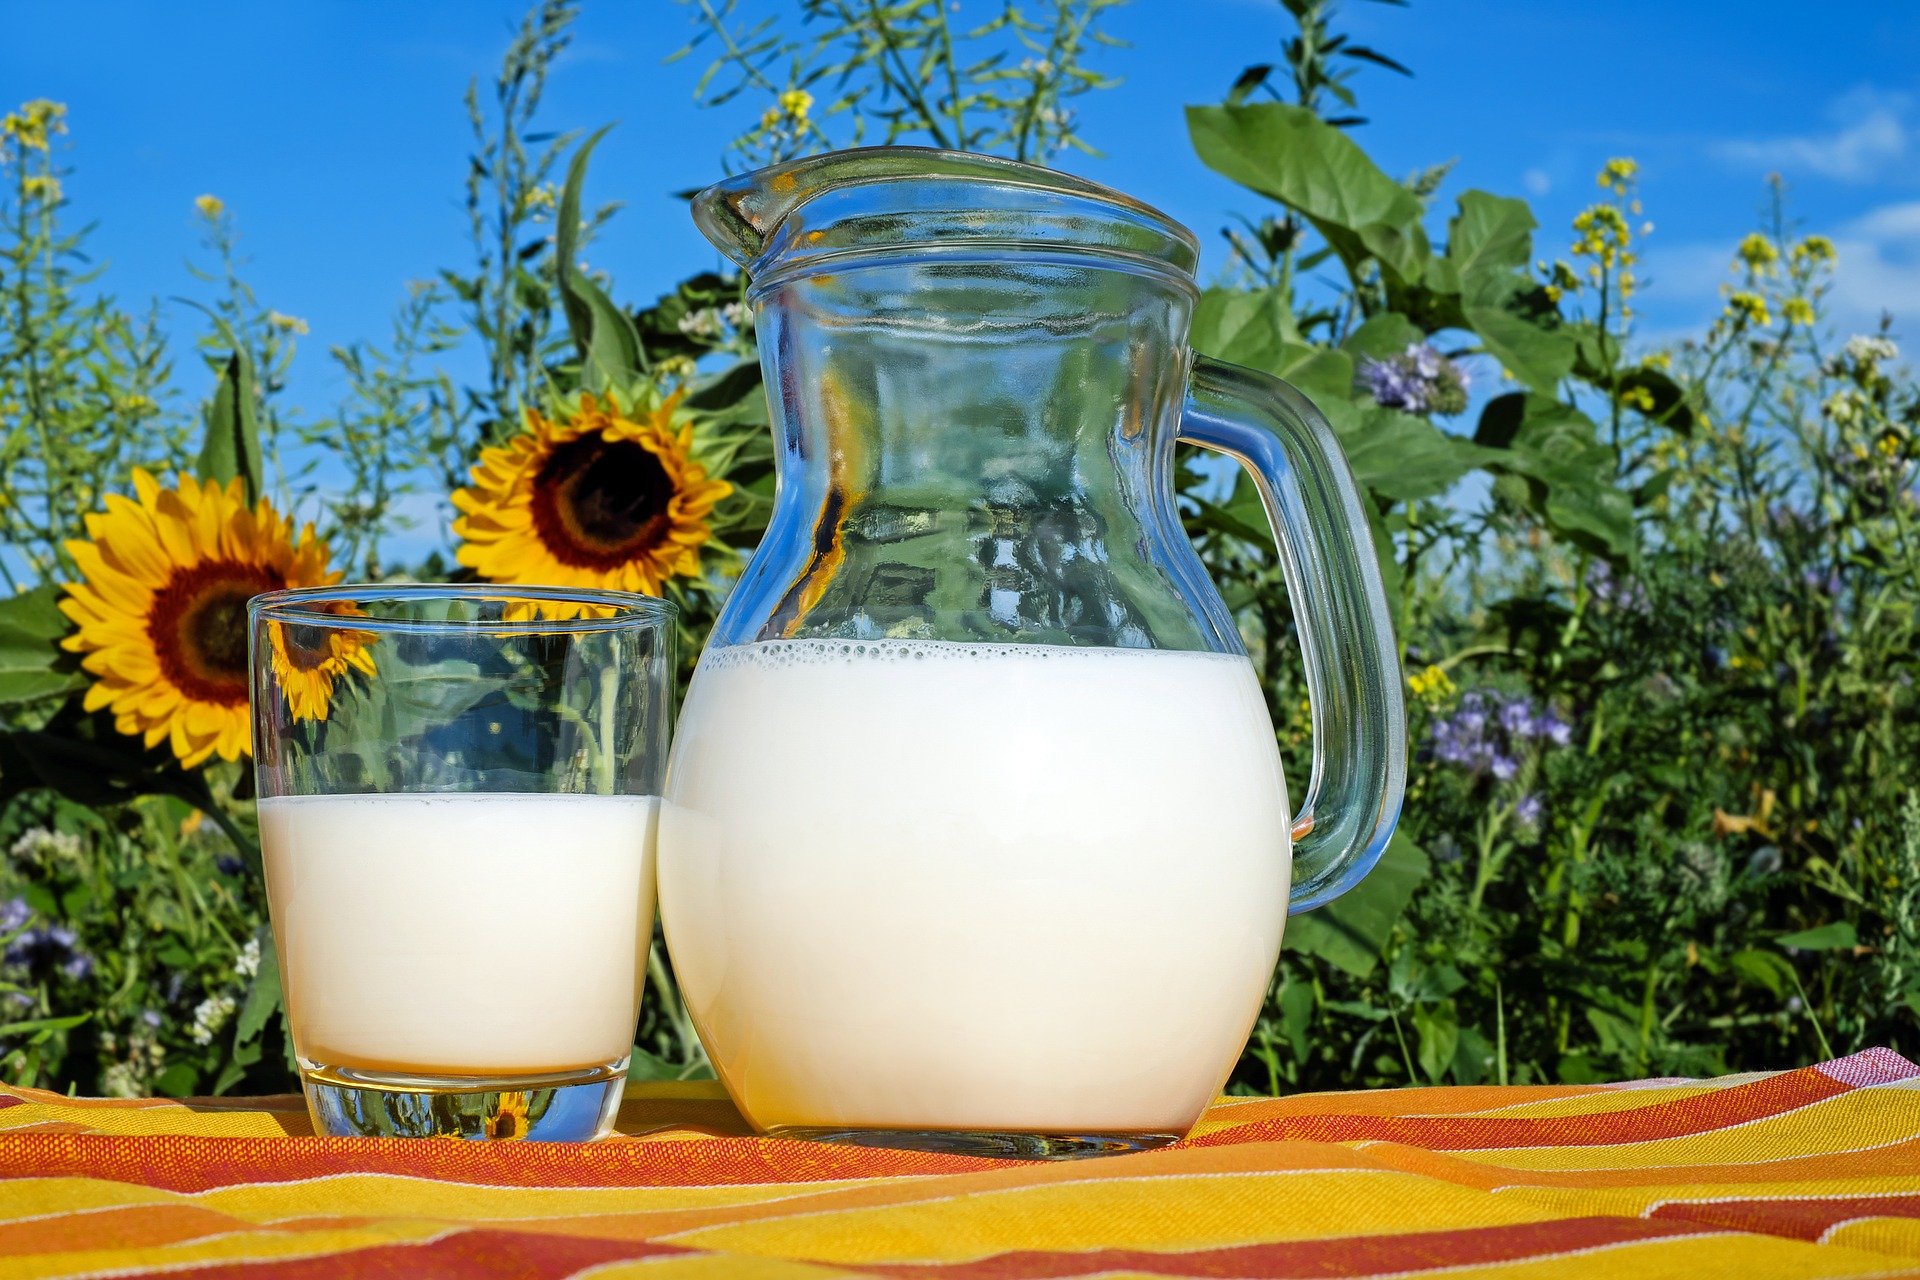 A jug of milk sits next to a glass of milk in front of sunflowers